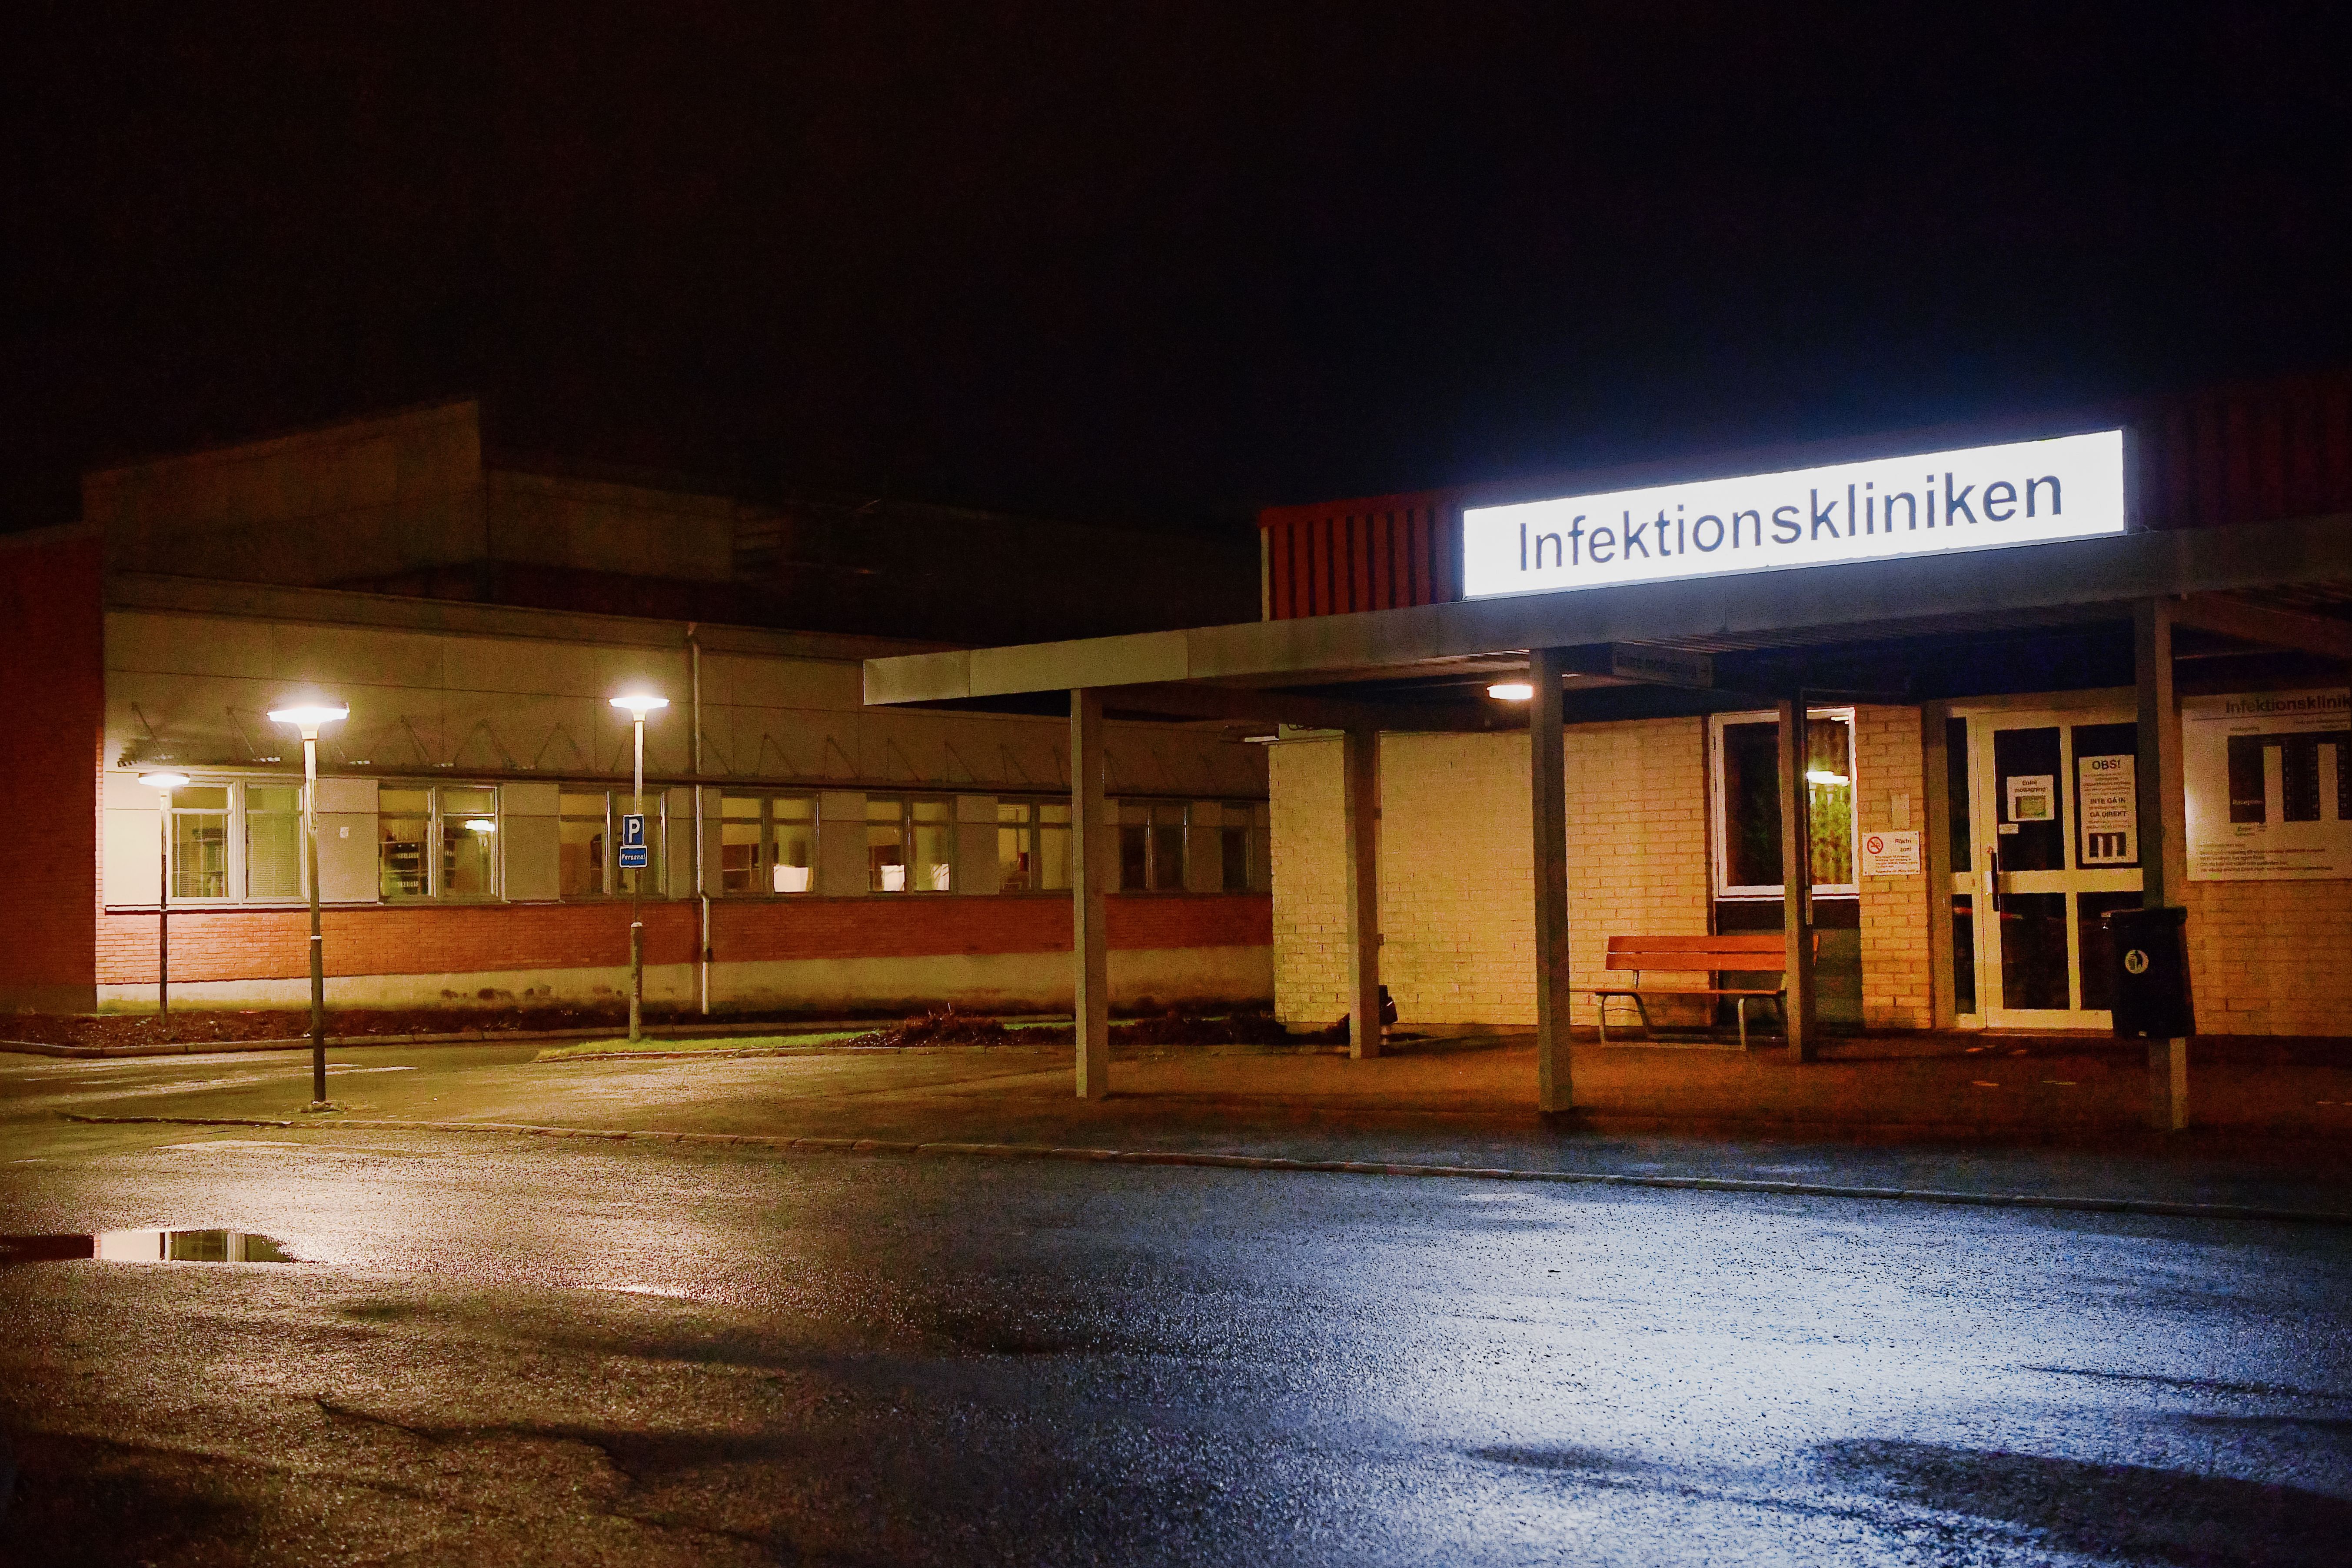 The clinic for infectious diseases is seen in Jönköping, Sweden, on January 31.